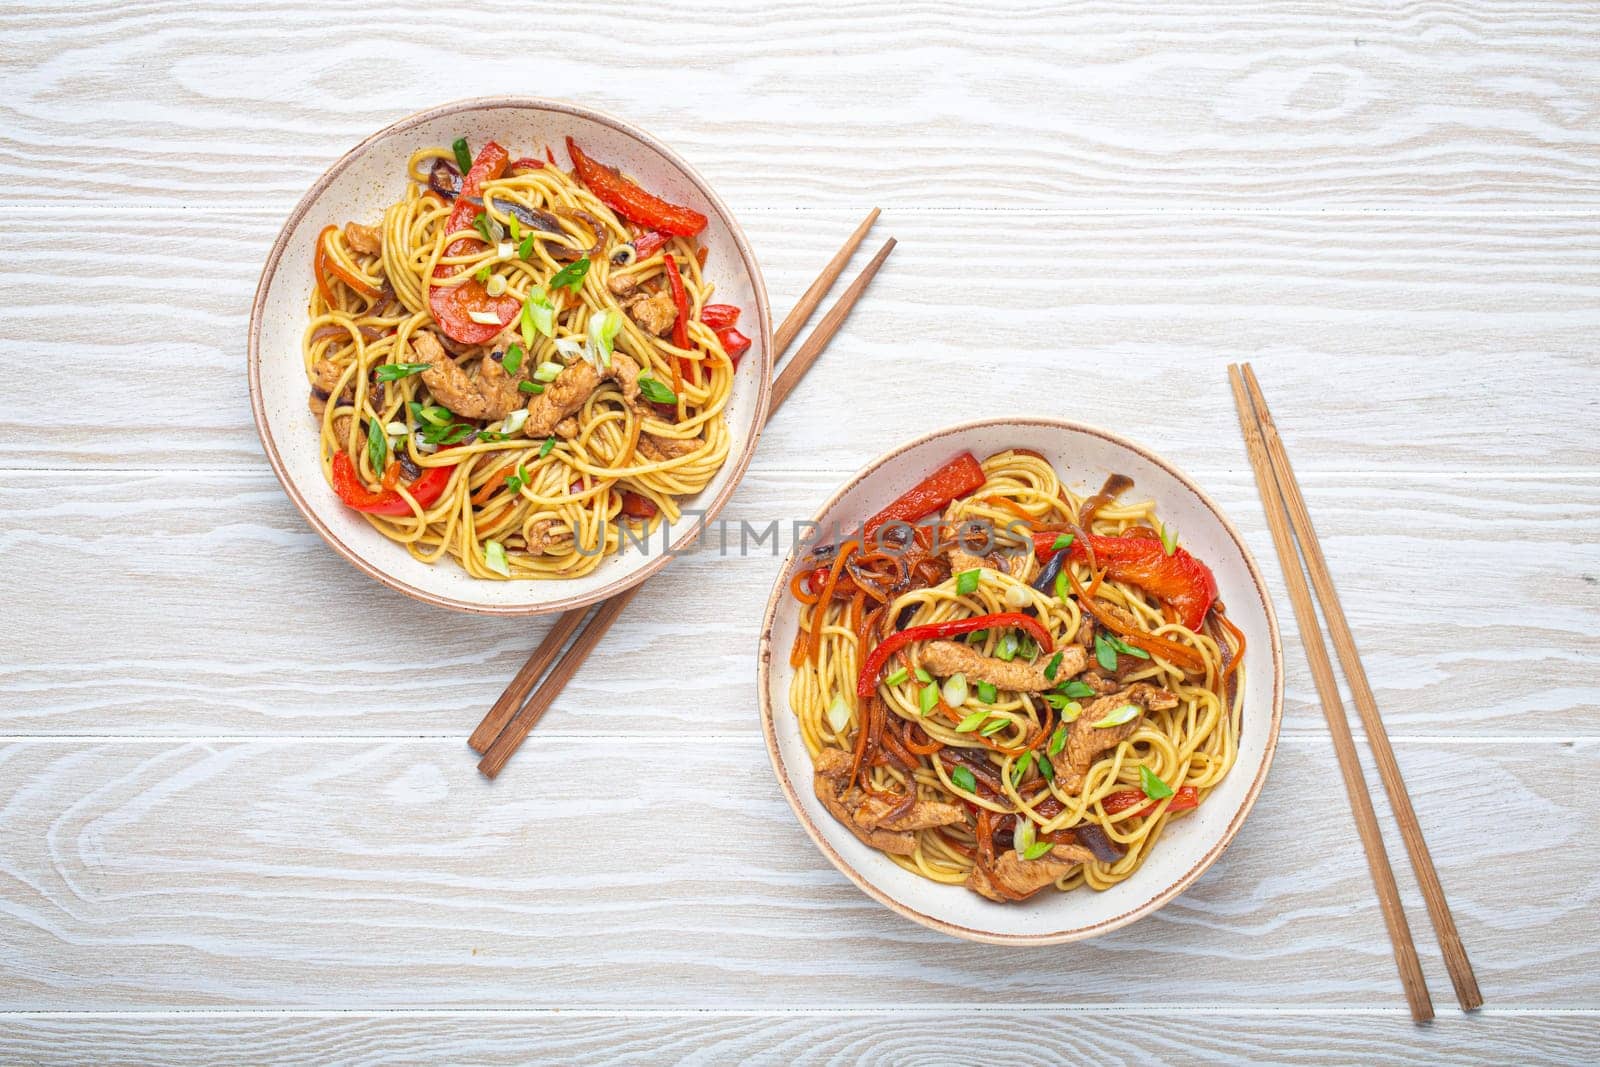 Two bowls with Chow Mein or Lo Mein, traditional Chinese stir fry noodles with meat and vegetables, served with chopsticks top view on rustic white wooden background table.